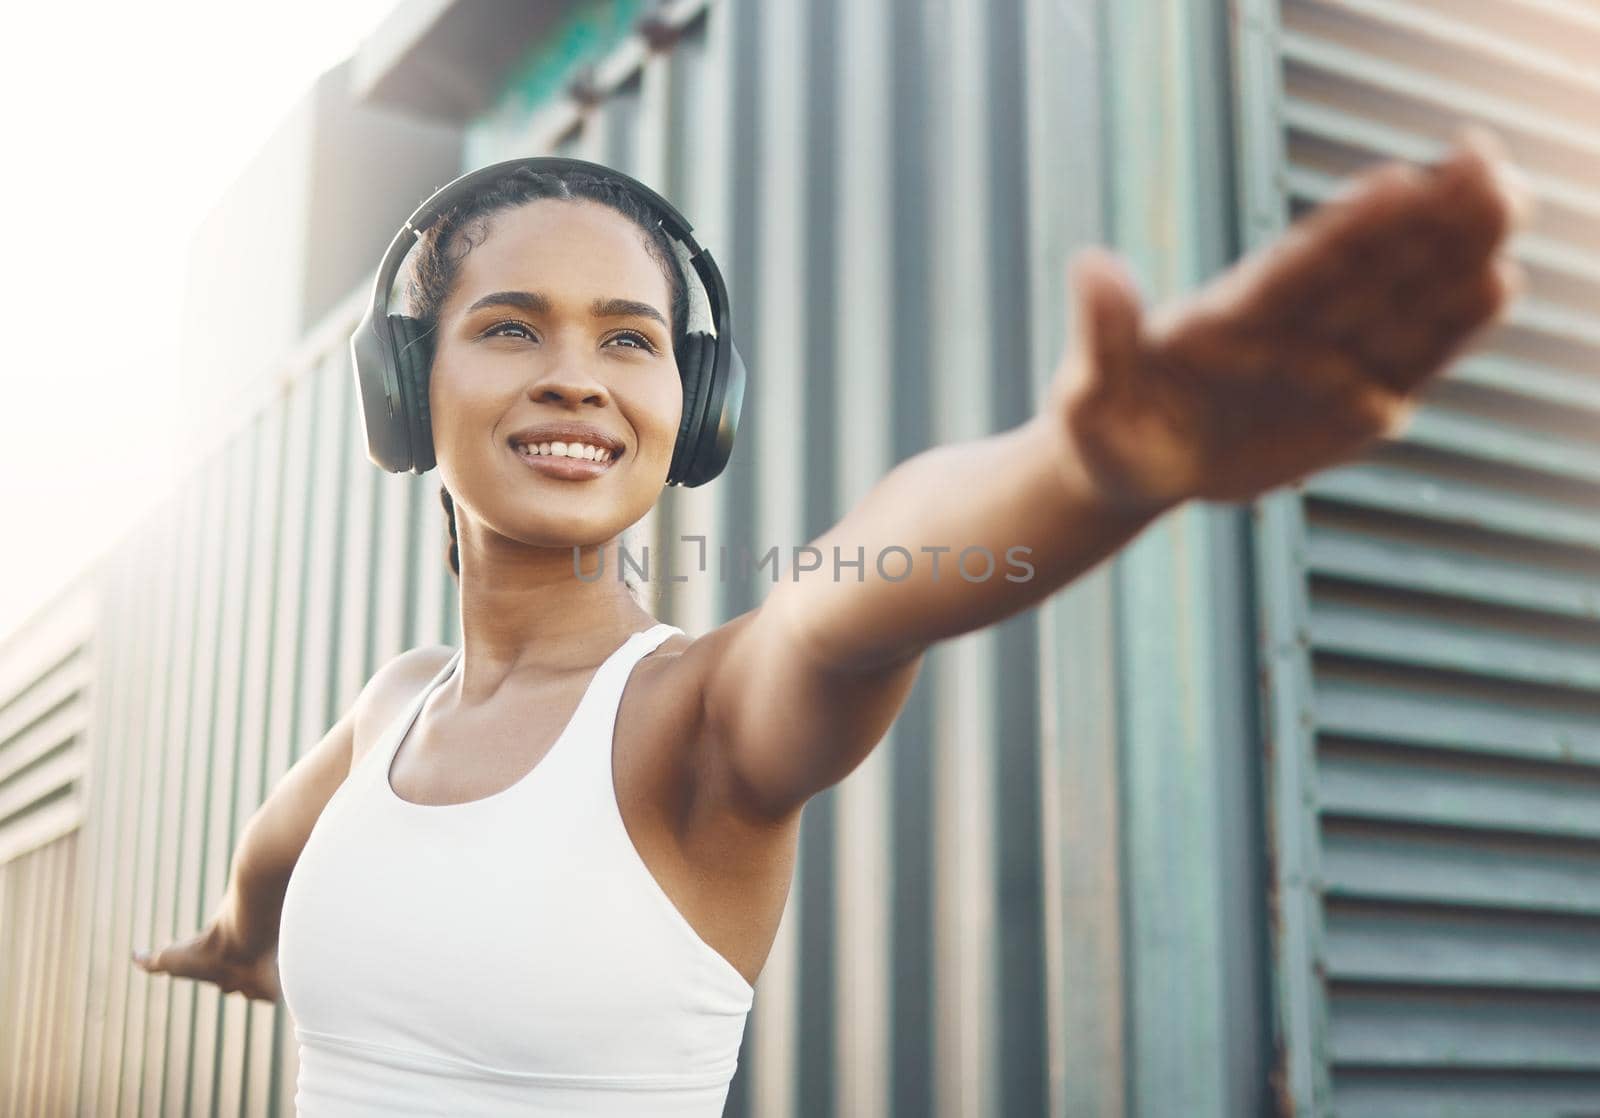 One fit young hispanic woman stretching arms in warrior pose for warmup to prevent injury while exercising in an urban setting outdoors. Happy and motivated female athlete listening to music with headphones while preparing body and mind for training workout or run by YuriArcurs